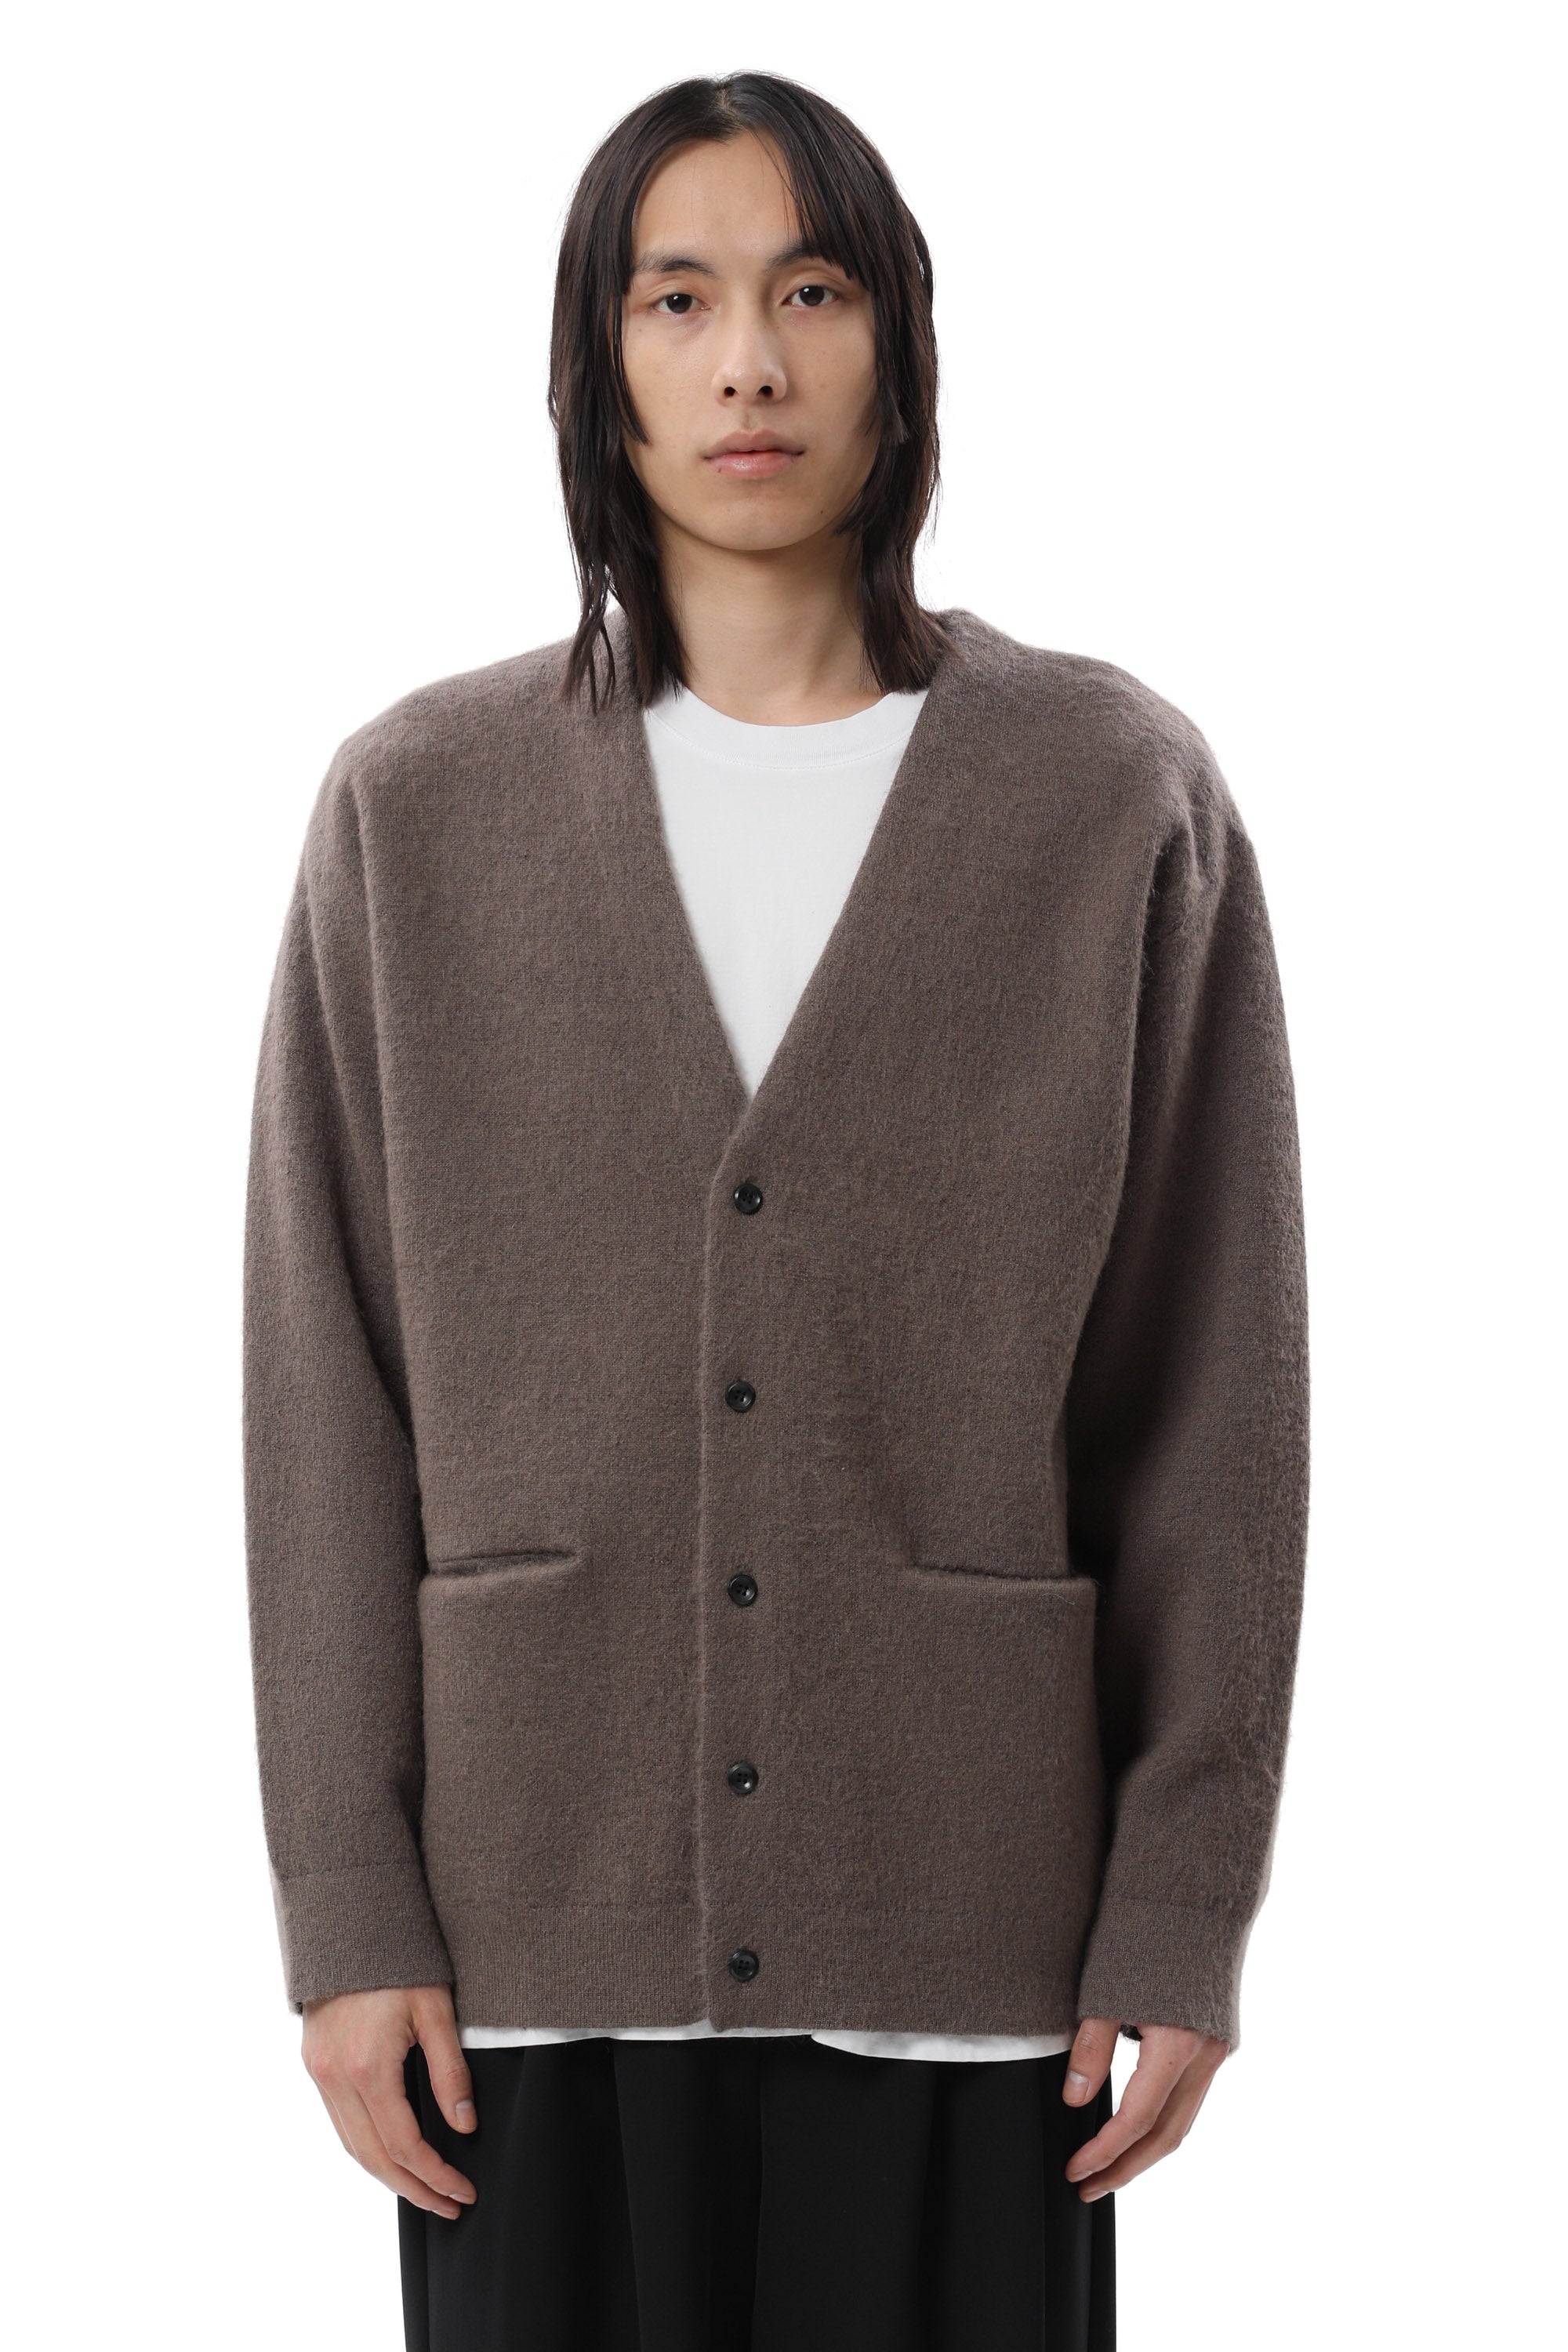 AK22-057 WO/NY MOHAIRｘPE DOUBLE FACE KNIT CARDIGAN